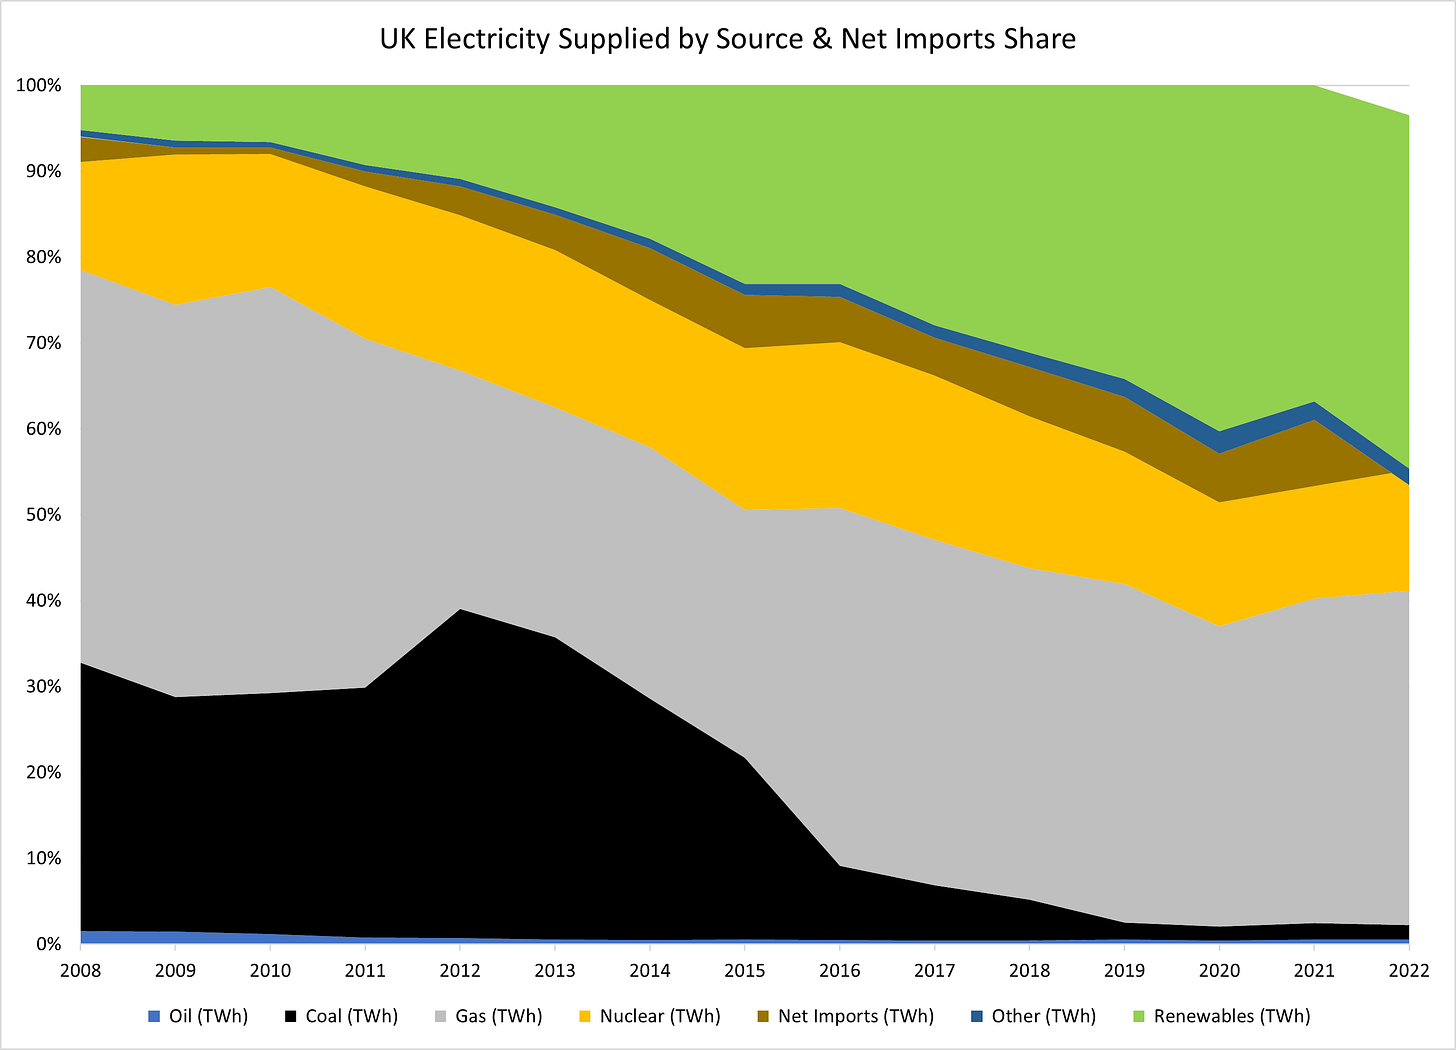 Figure 6 - UK Electricity Supplied by Source Share (%)